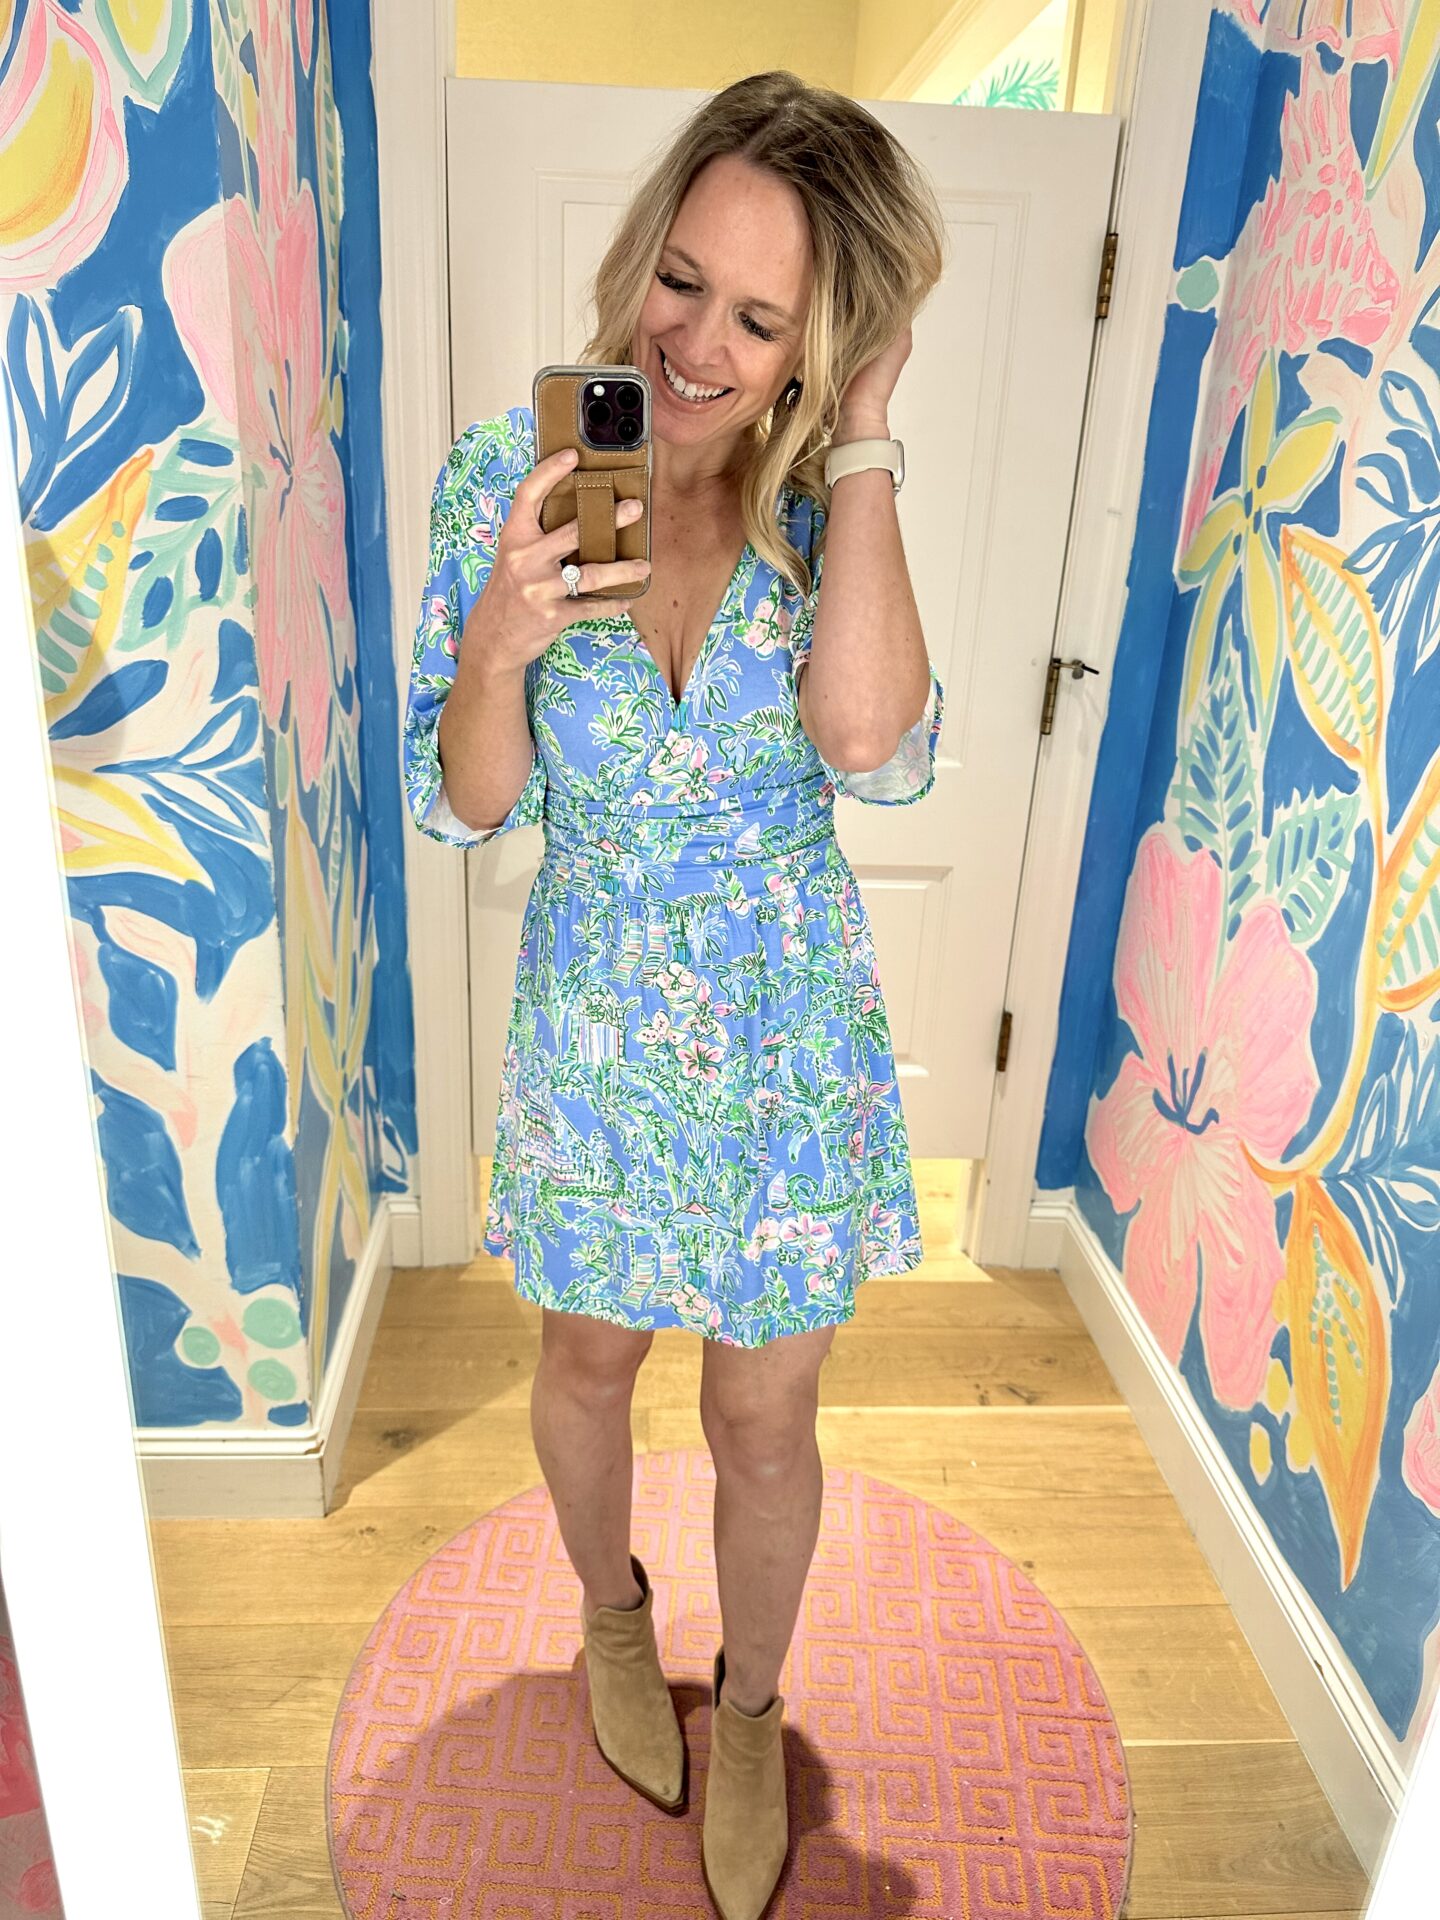 Lilly Pulitzer sale dates